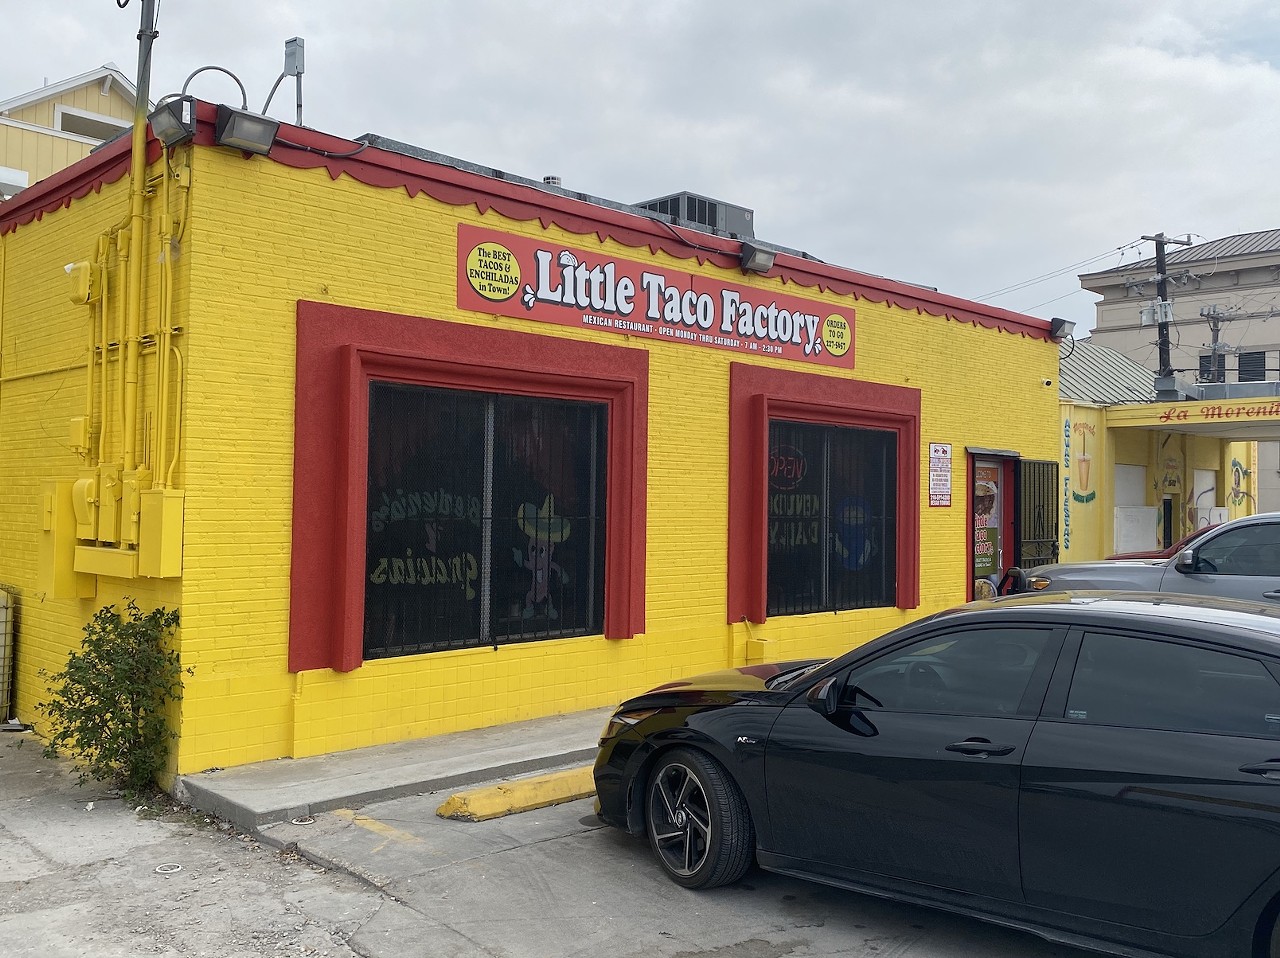 Little Taco Factory
1502 McCullough Ave., (210) 227-5657, facebook.com/profile.php?id=100063658174807
From juicy barbacoa and tender carne guisada to well-packed puffy tacos, this “taco factory” manufactures some of the best breakfast options for taco lovers.